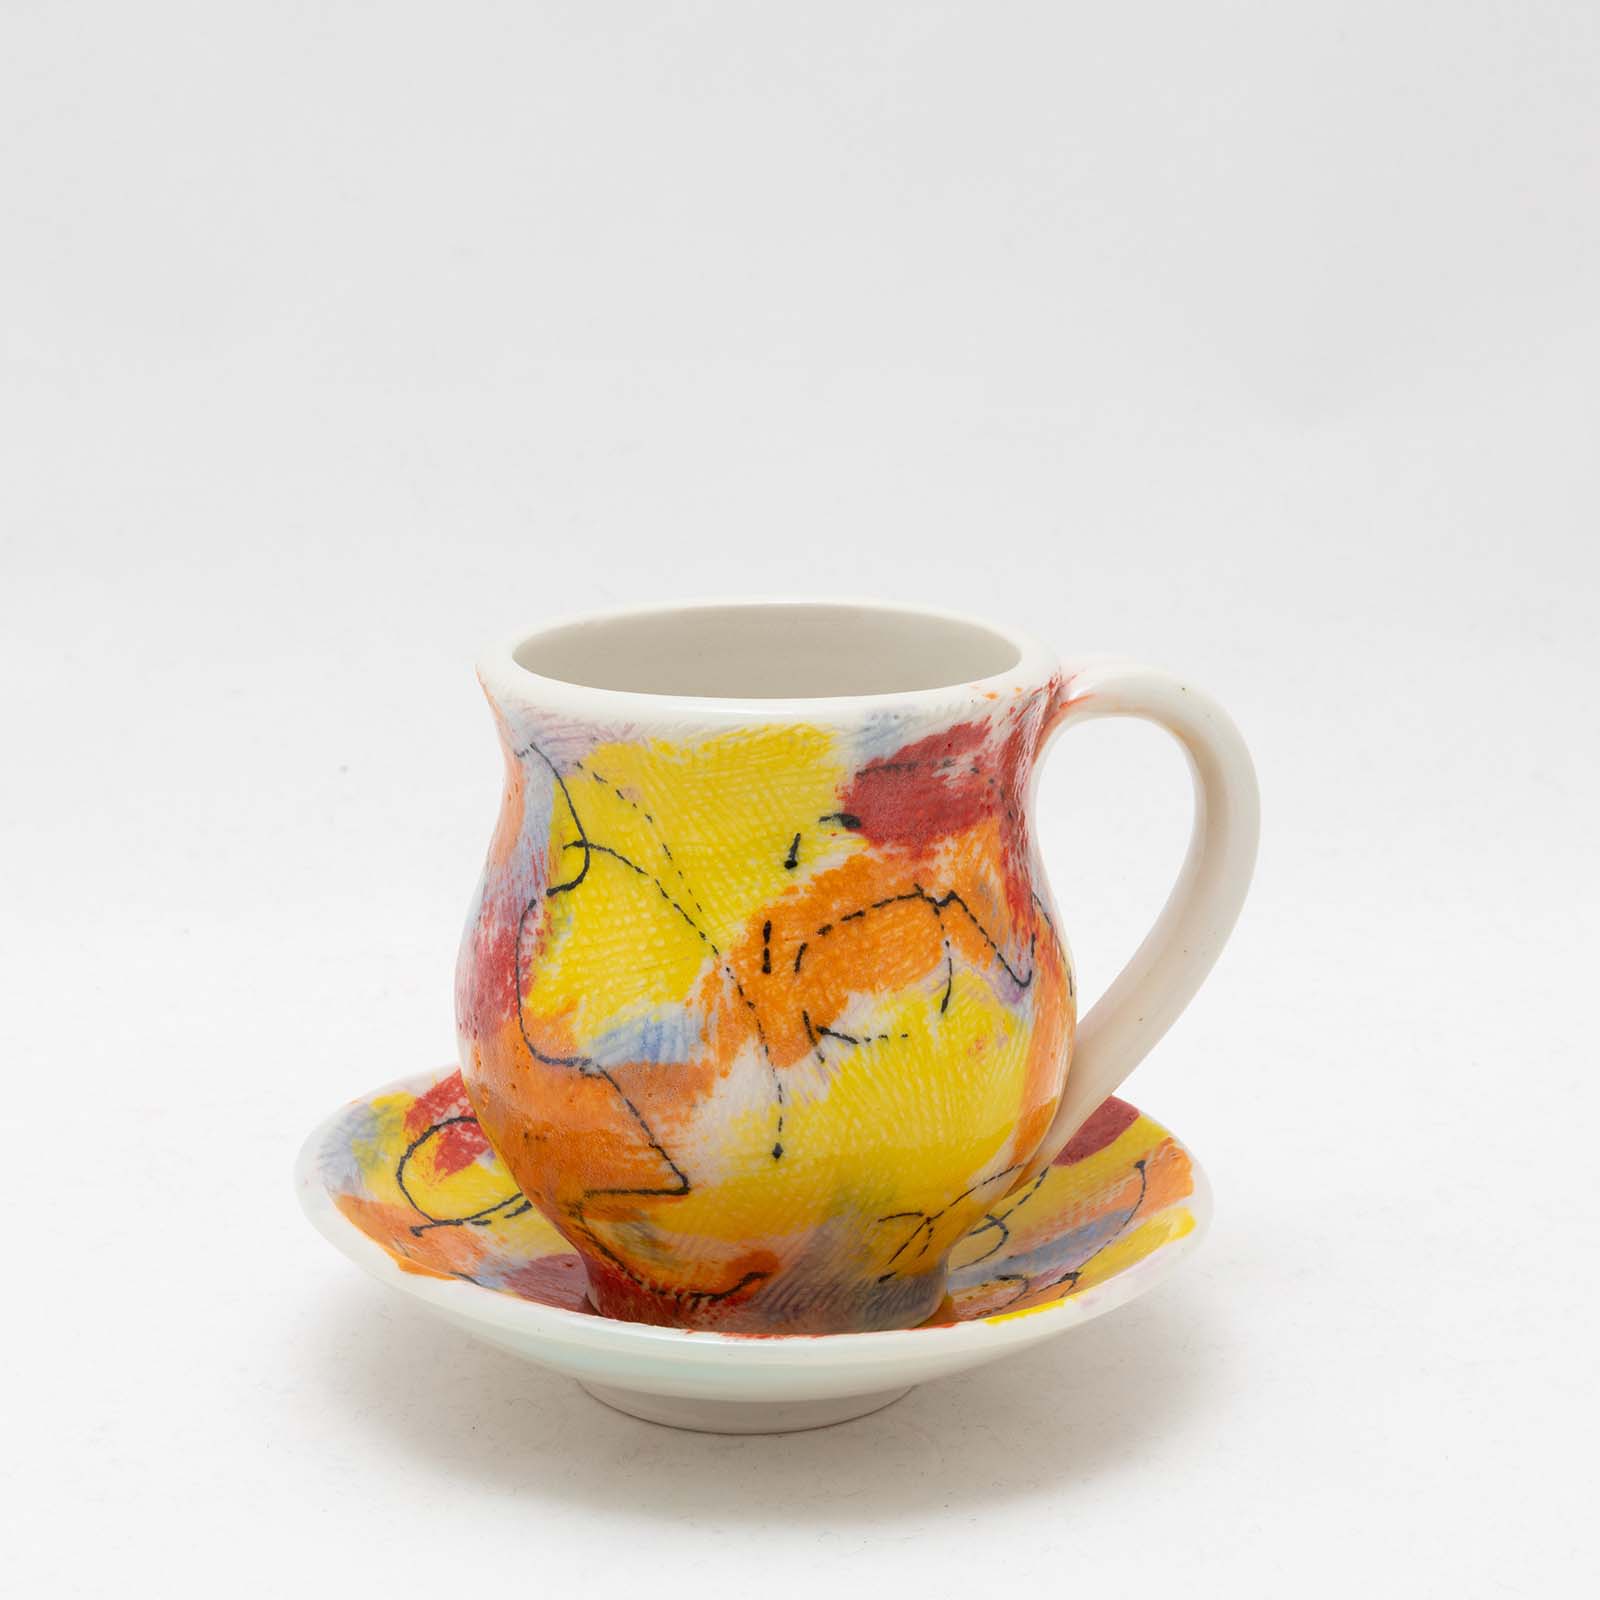 Janet K. Burner, Color Me Color, cup: 4 in. (10 cm) in height; saucer 5.5 in. (14) in diameter, fired to cone 10 in oxidation, 2021. 